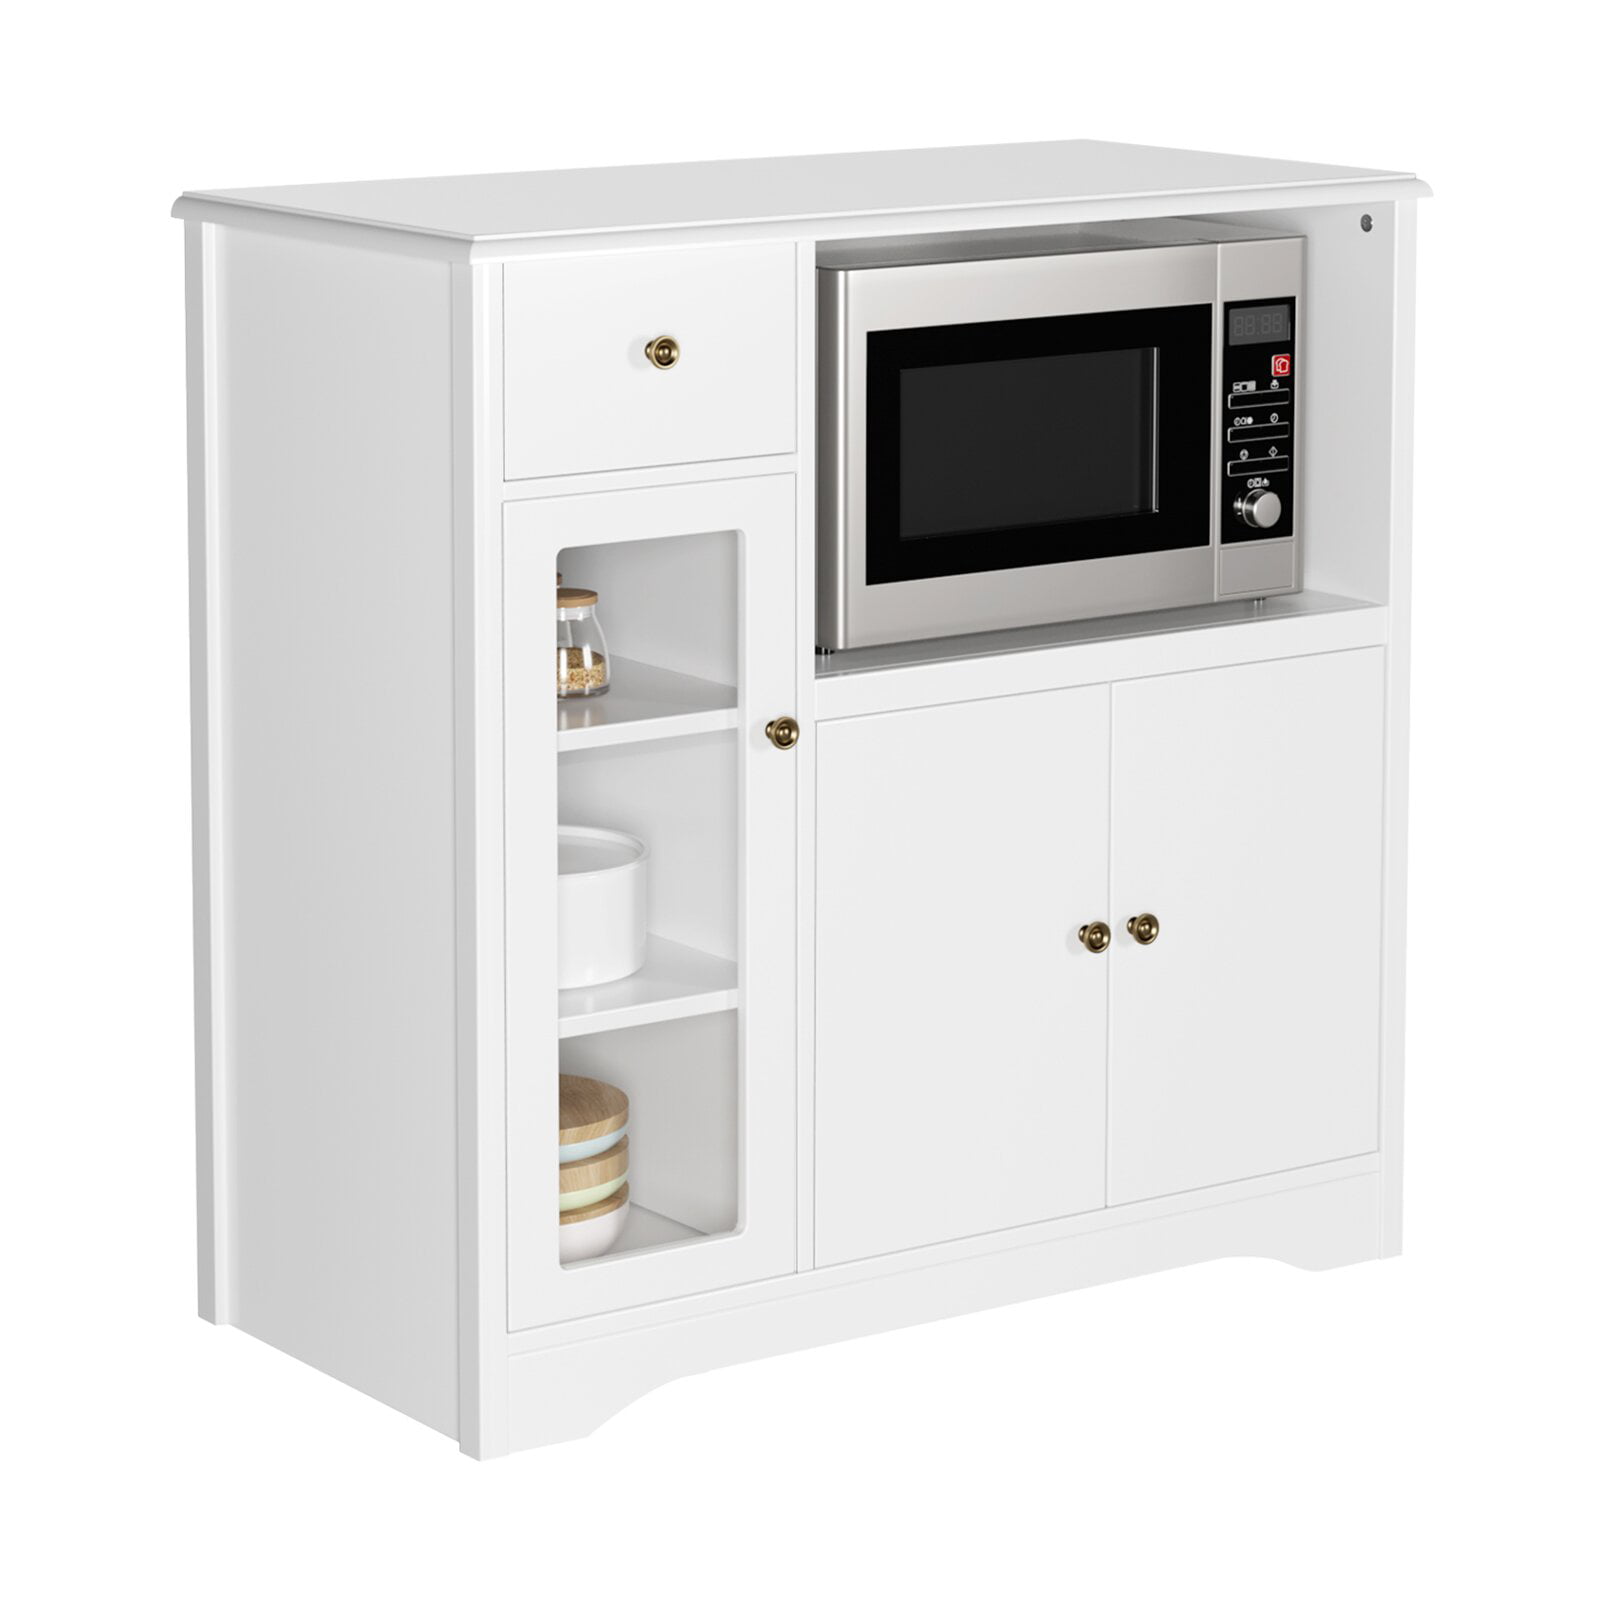 Homfa Microwave Cabinet With Hutch Kitchen Pantry Sideboard Adjule Shelves And Drawer For Dining Room White Bigbigmart Com